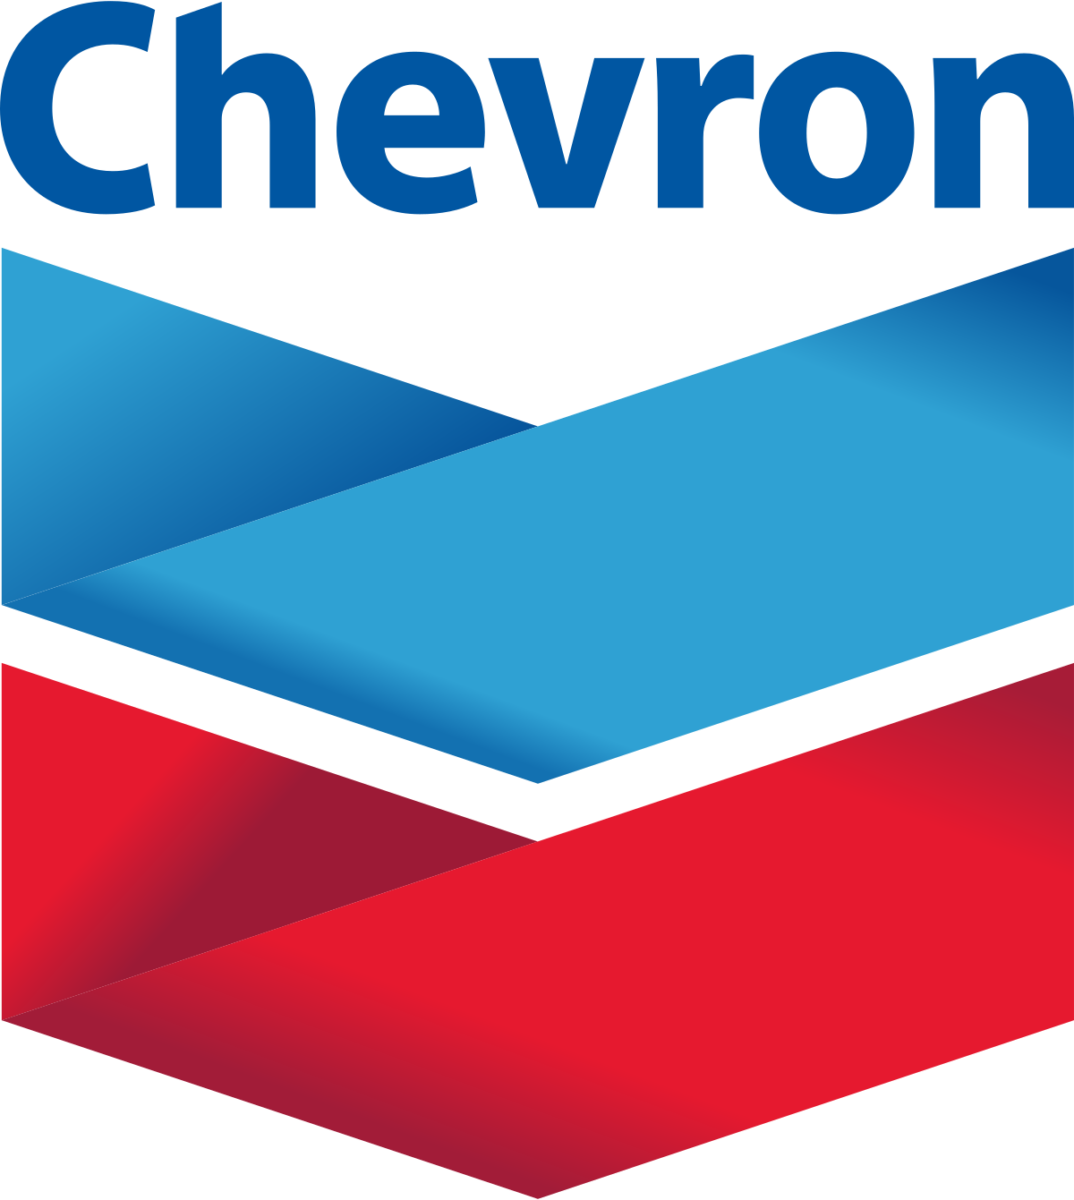 Chevron’s Financial Performance Amid Market Challenges